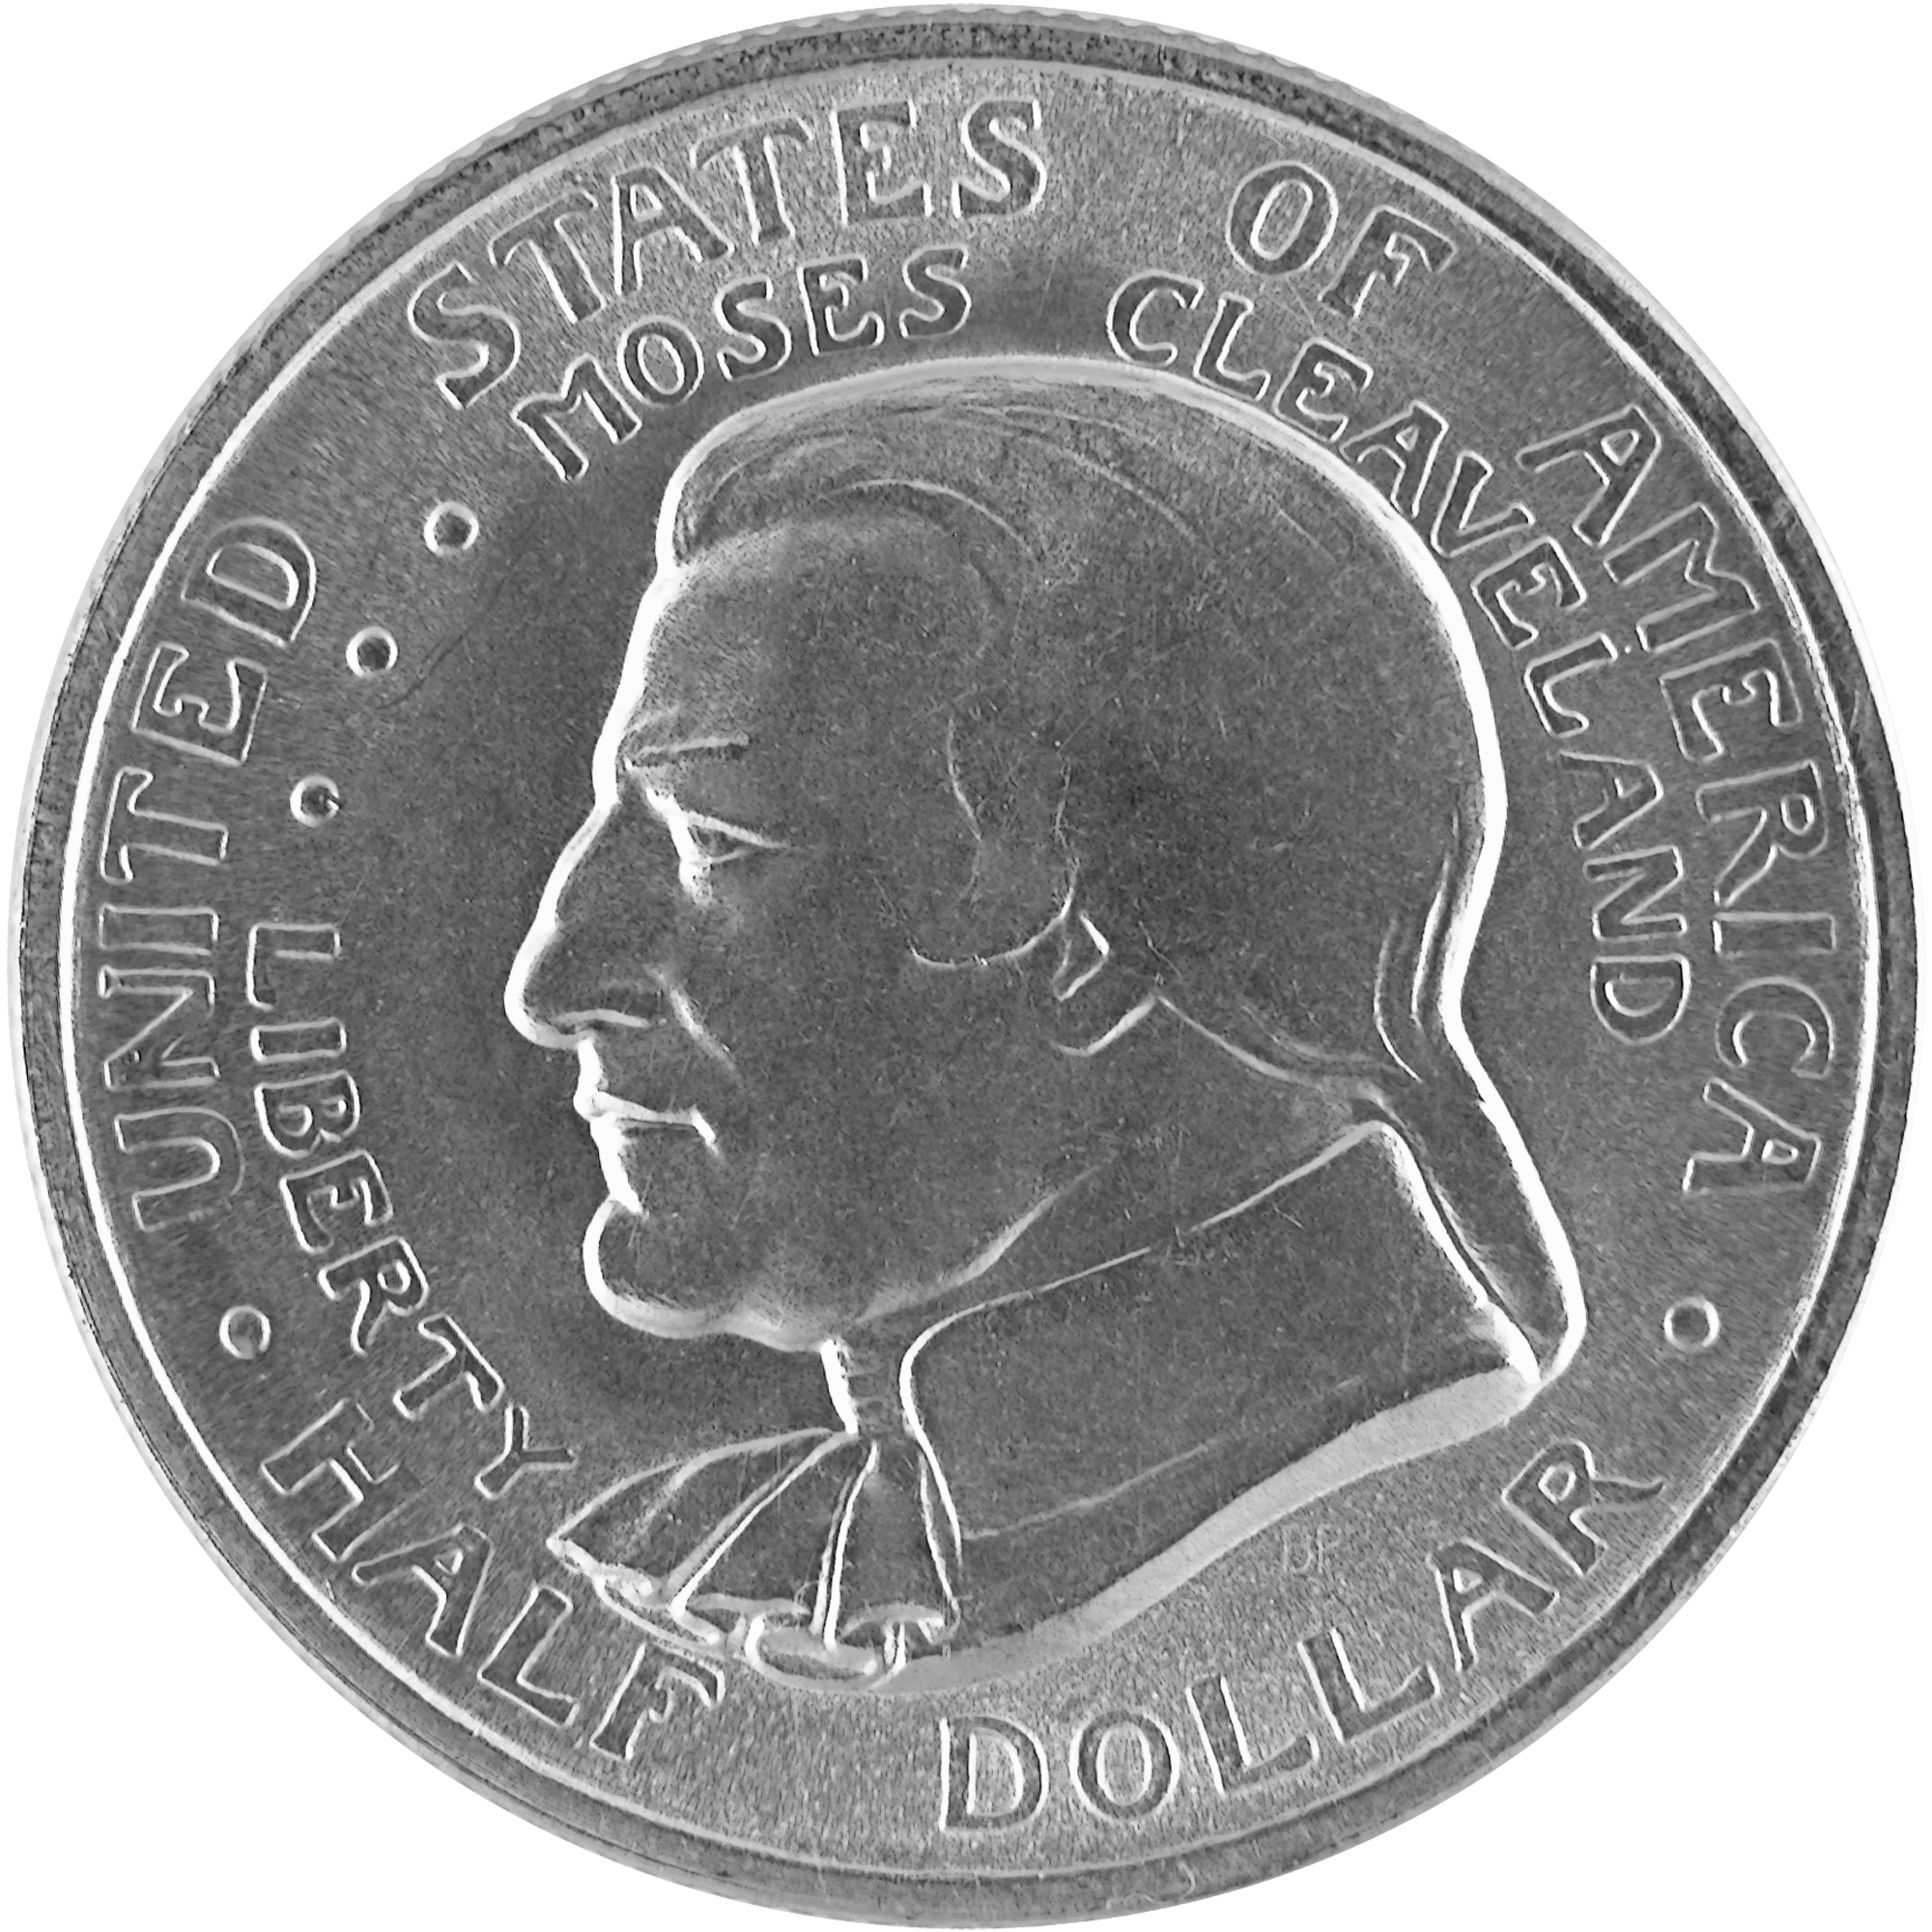 1936 Cleveland Great Lakes Exposition Commemorative Silver Half Dollar Coin Obverse